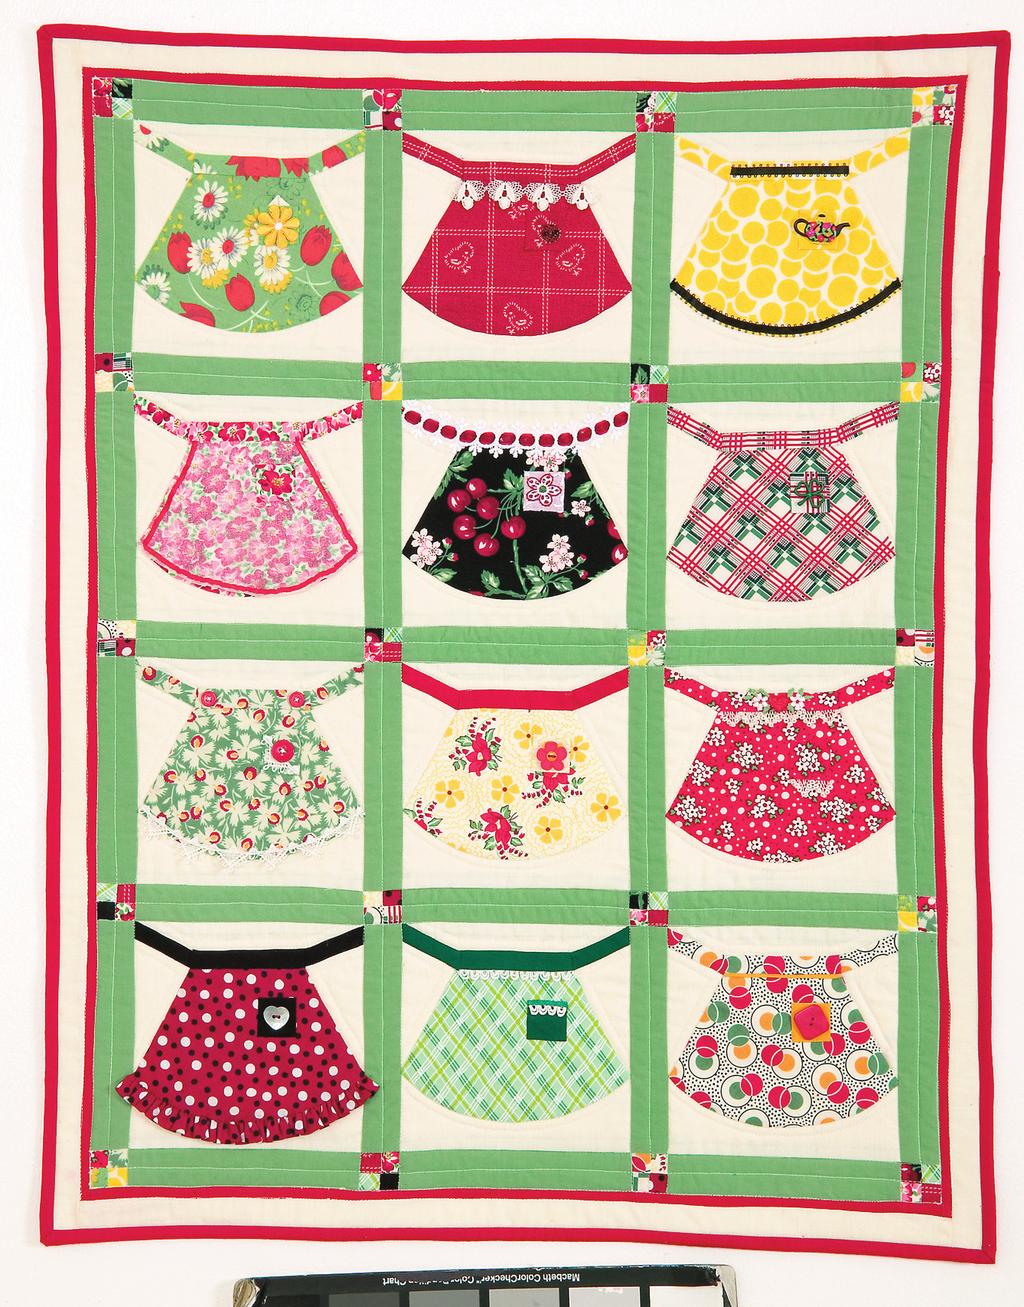 Women would trade apron patterns and embellishments much as they traded recipes.